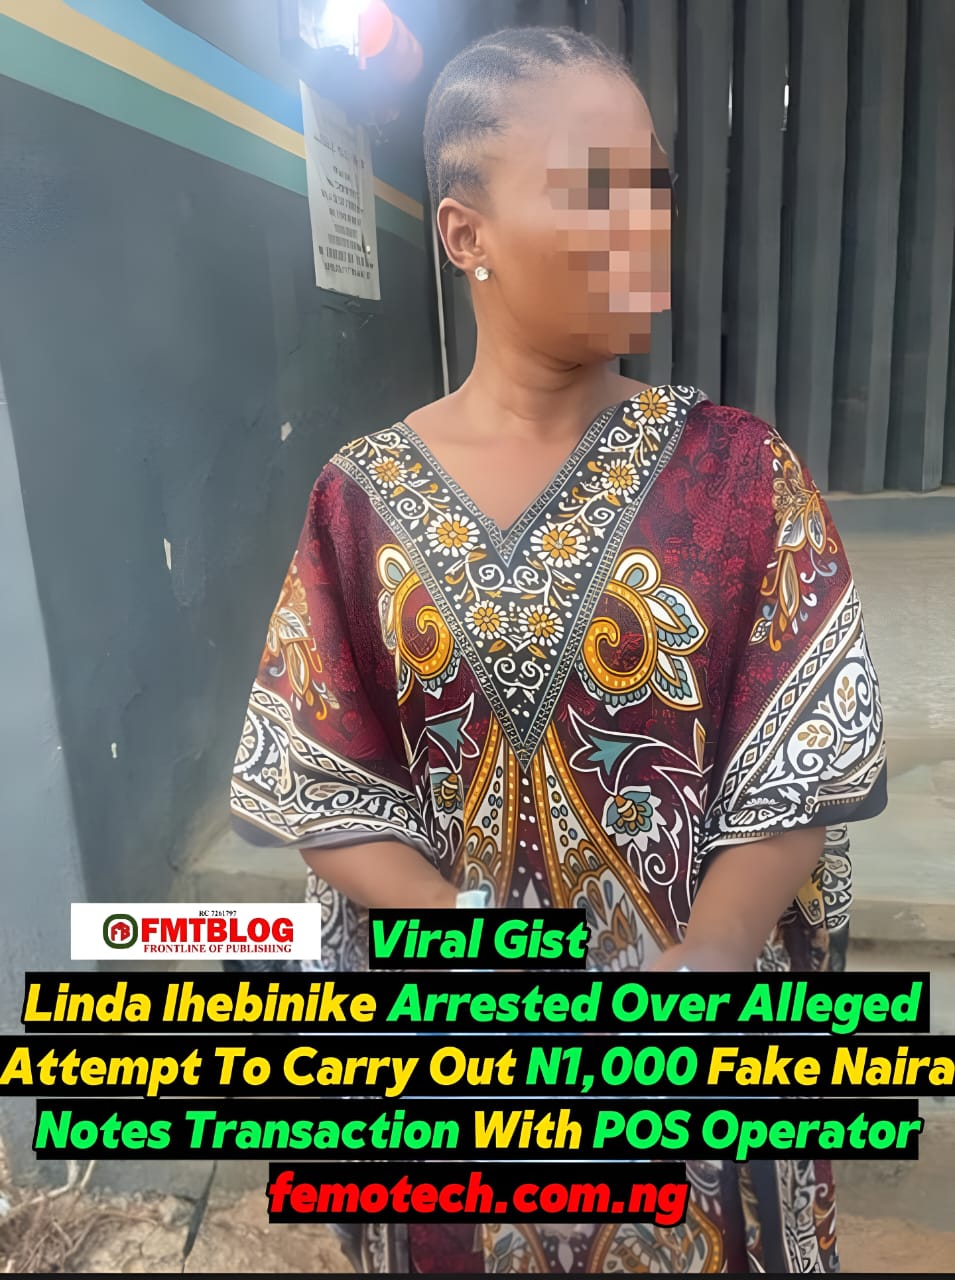 Linda Ihebinike Arrested Over Alleged Attempt To Carry Out N1,000 Fake Naira Notes Transaction With POS Operator